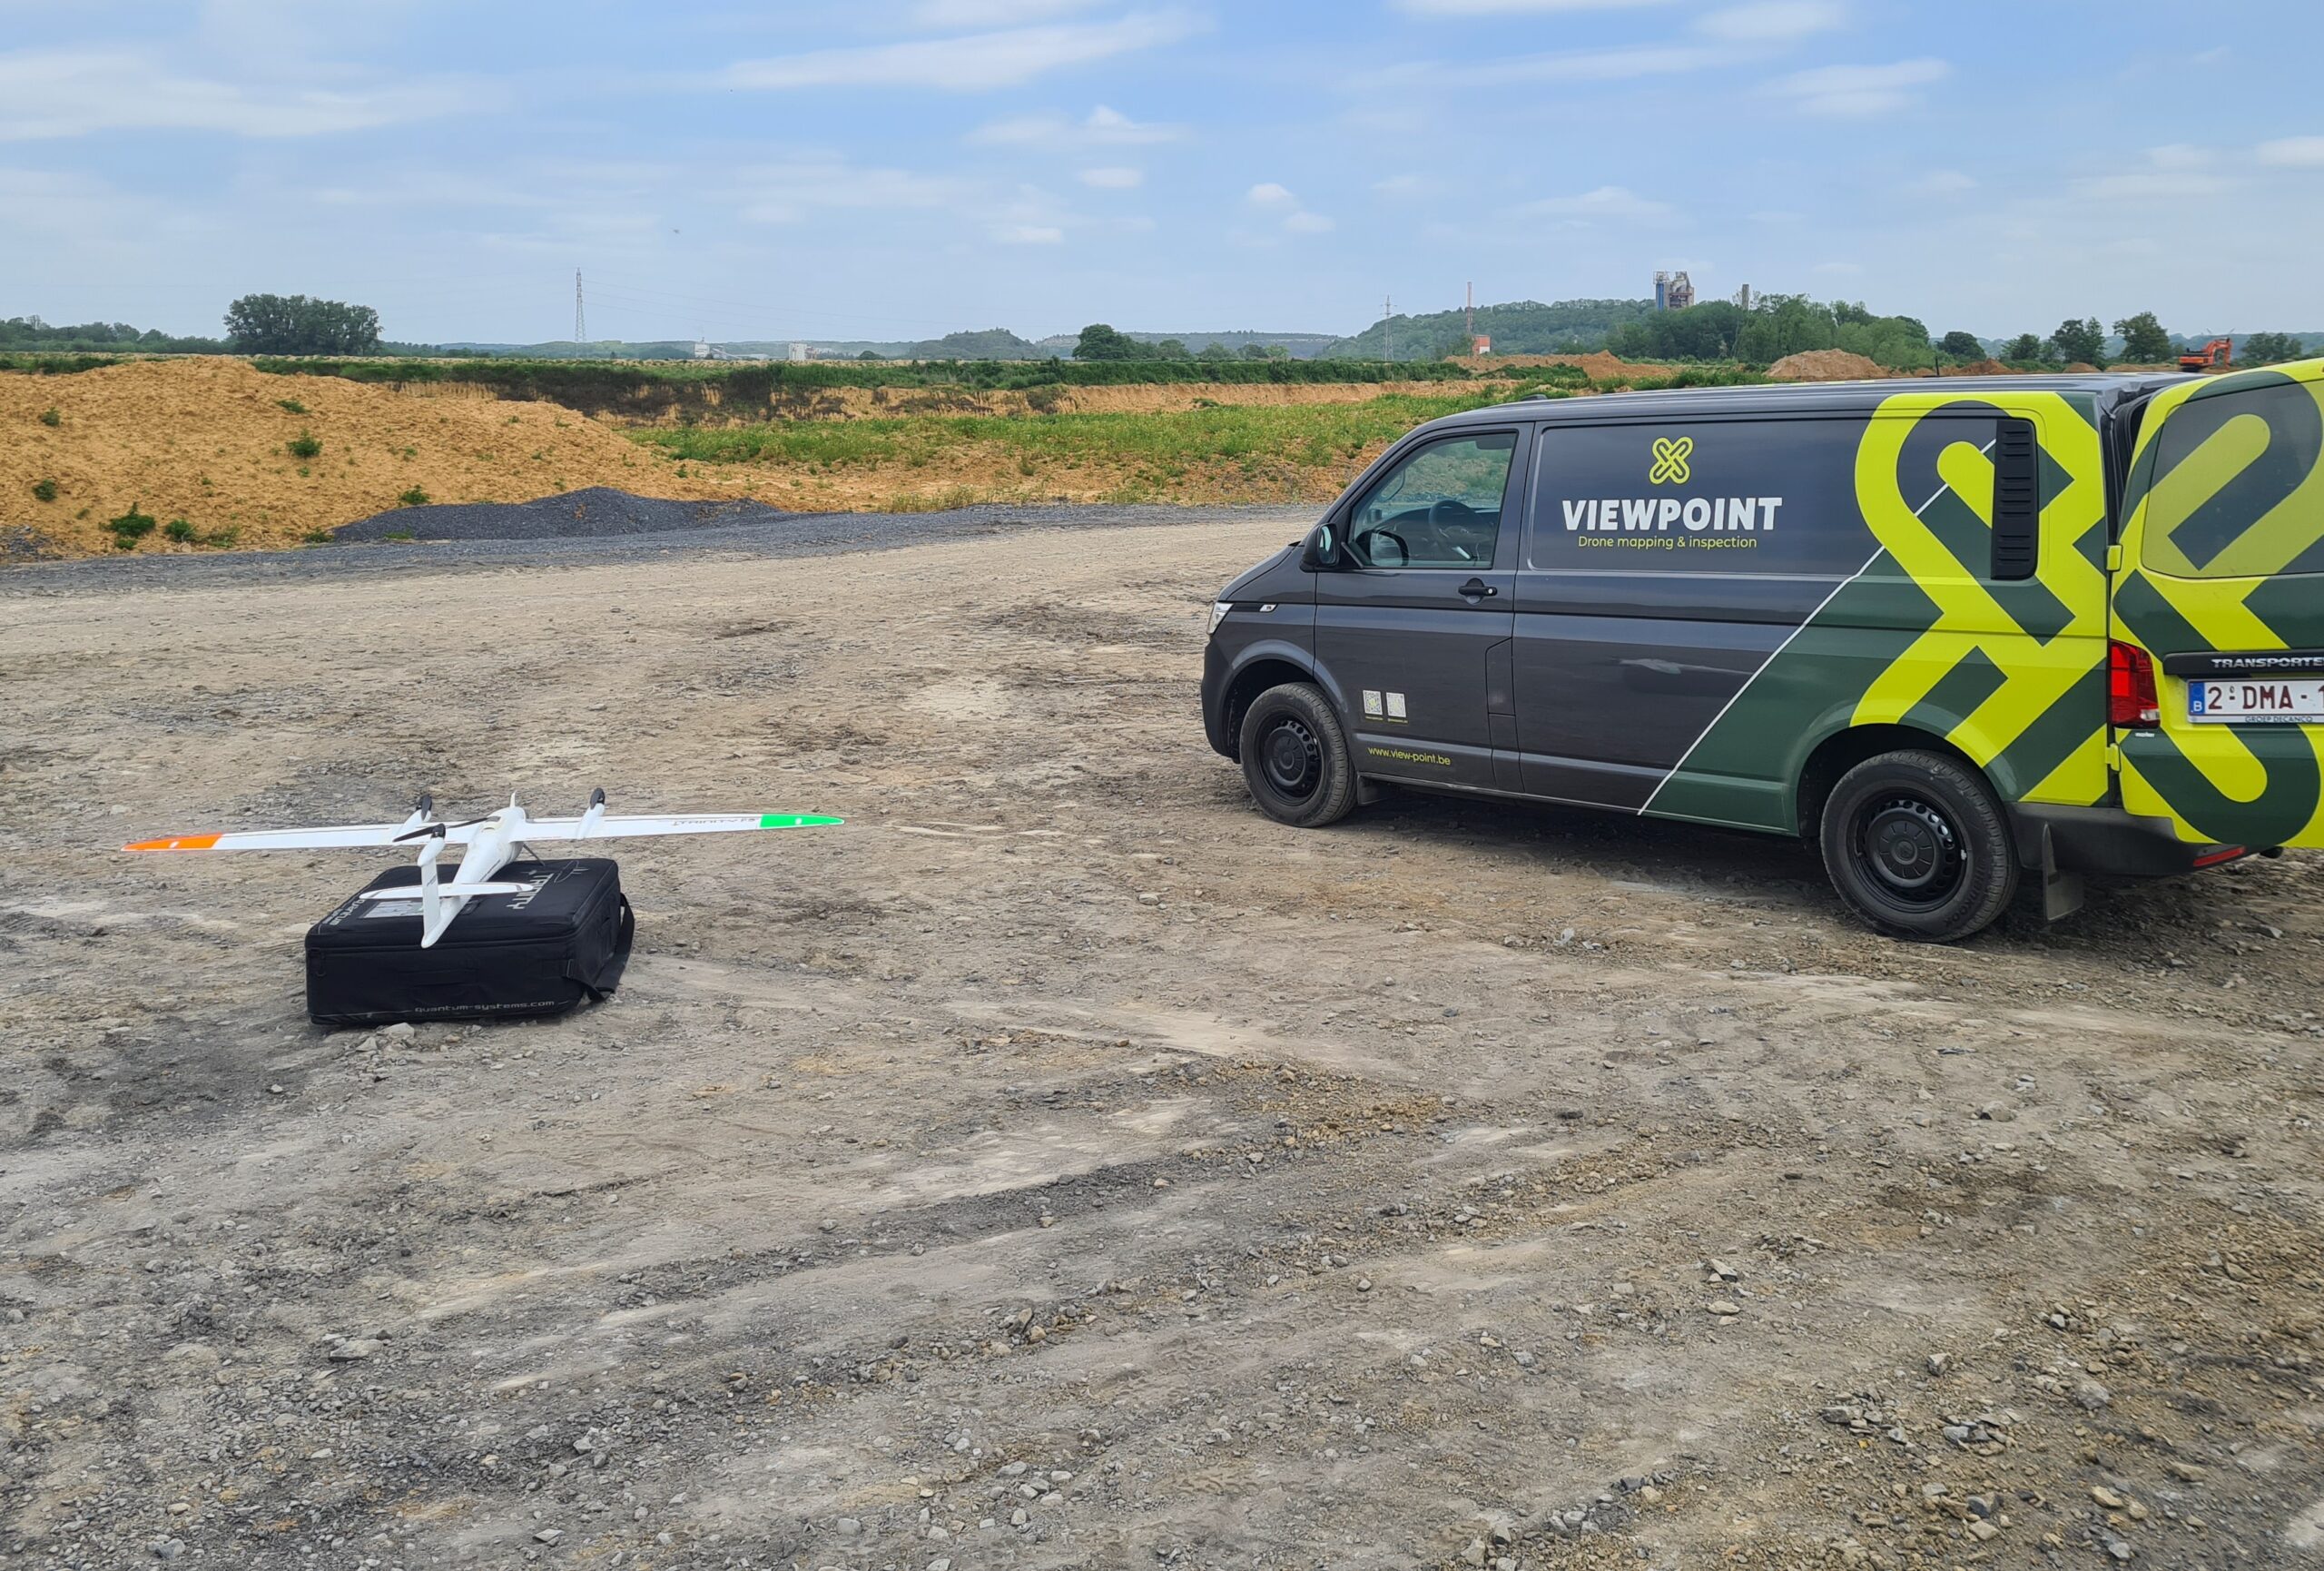 Viewpoint | Drone mapping & inspection